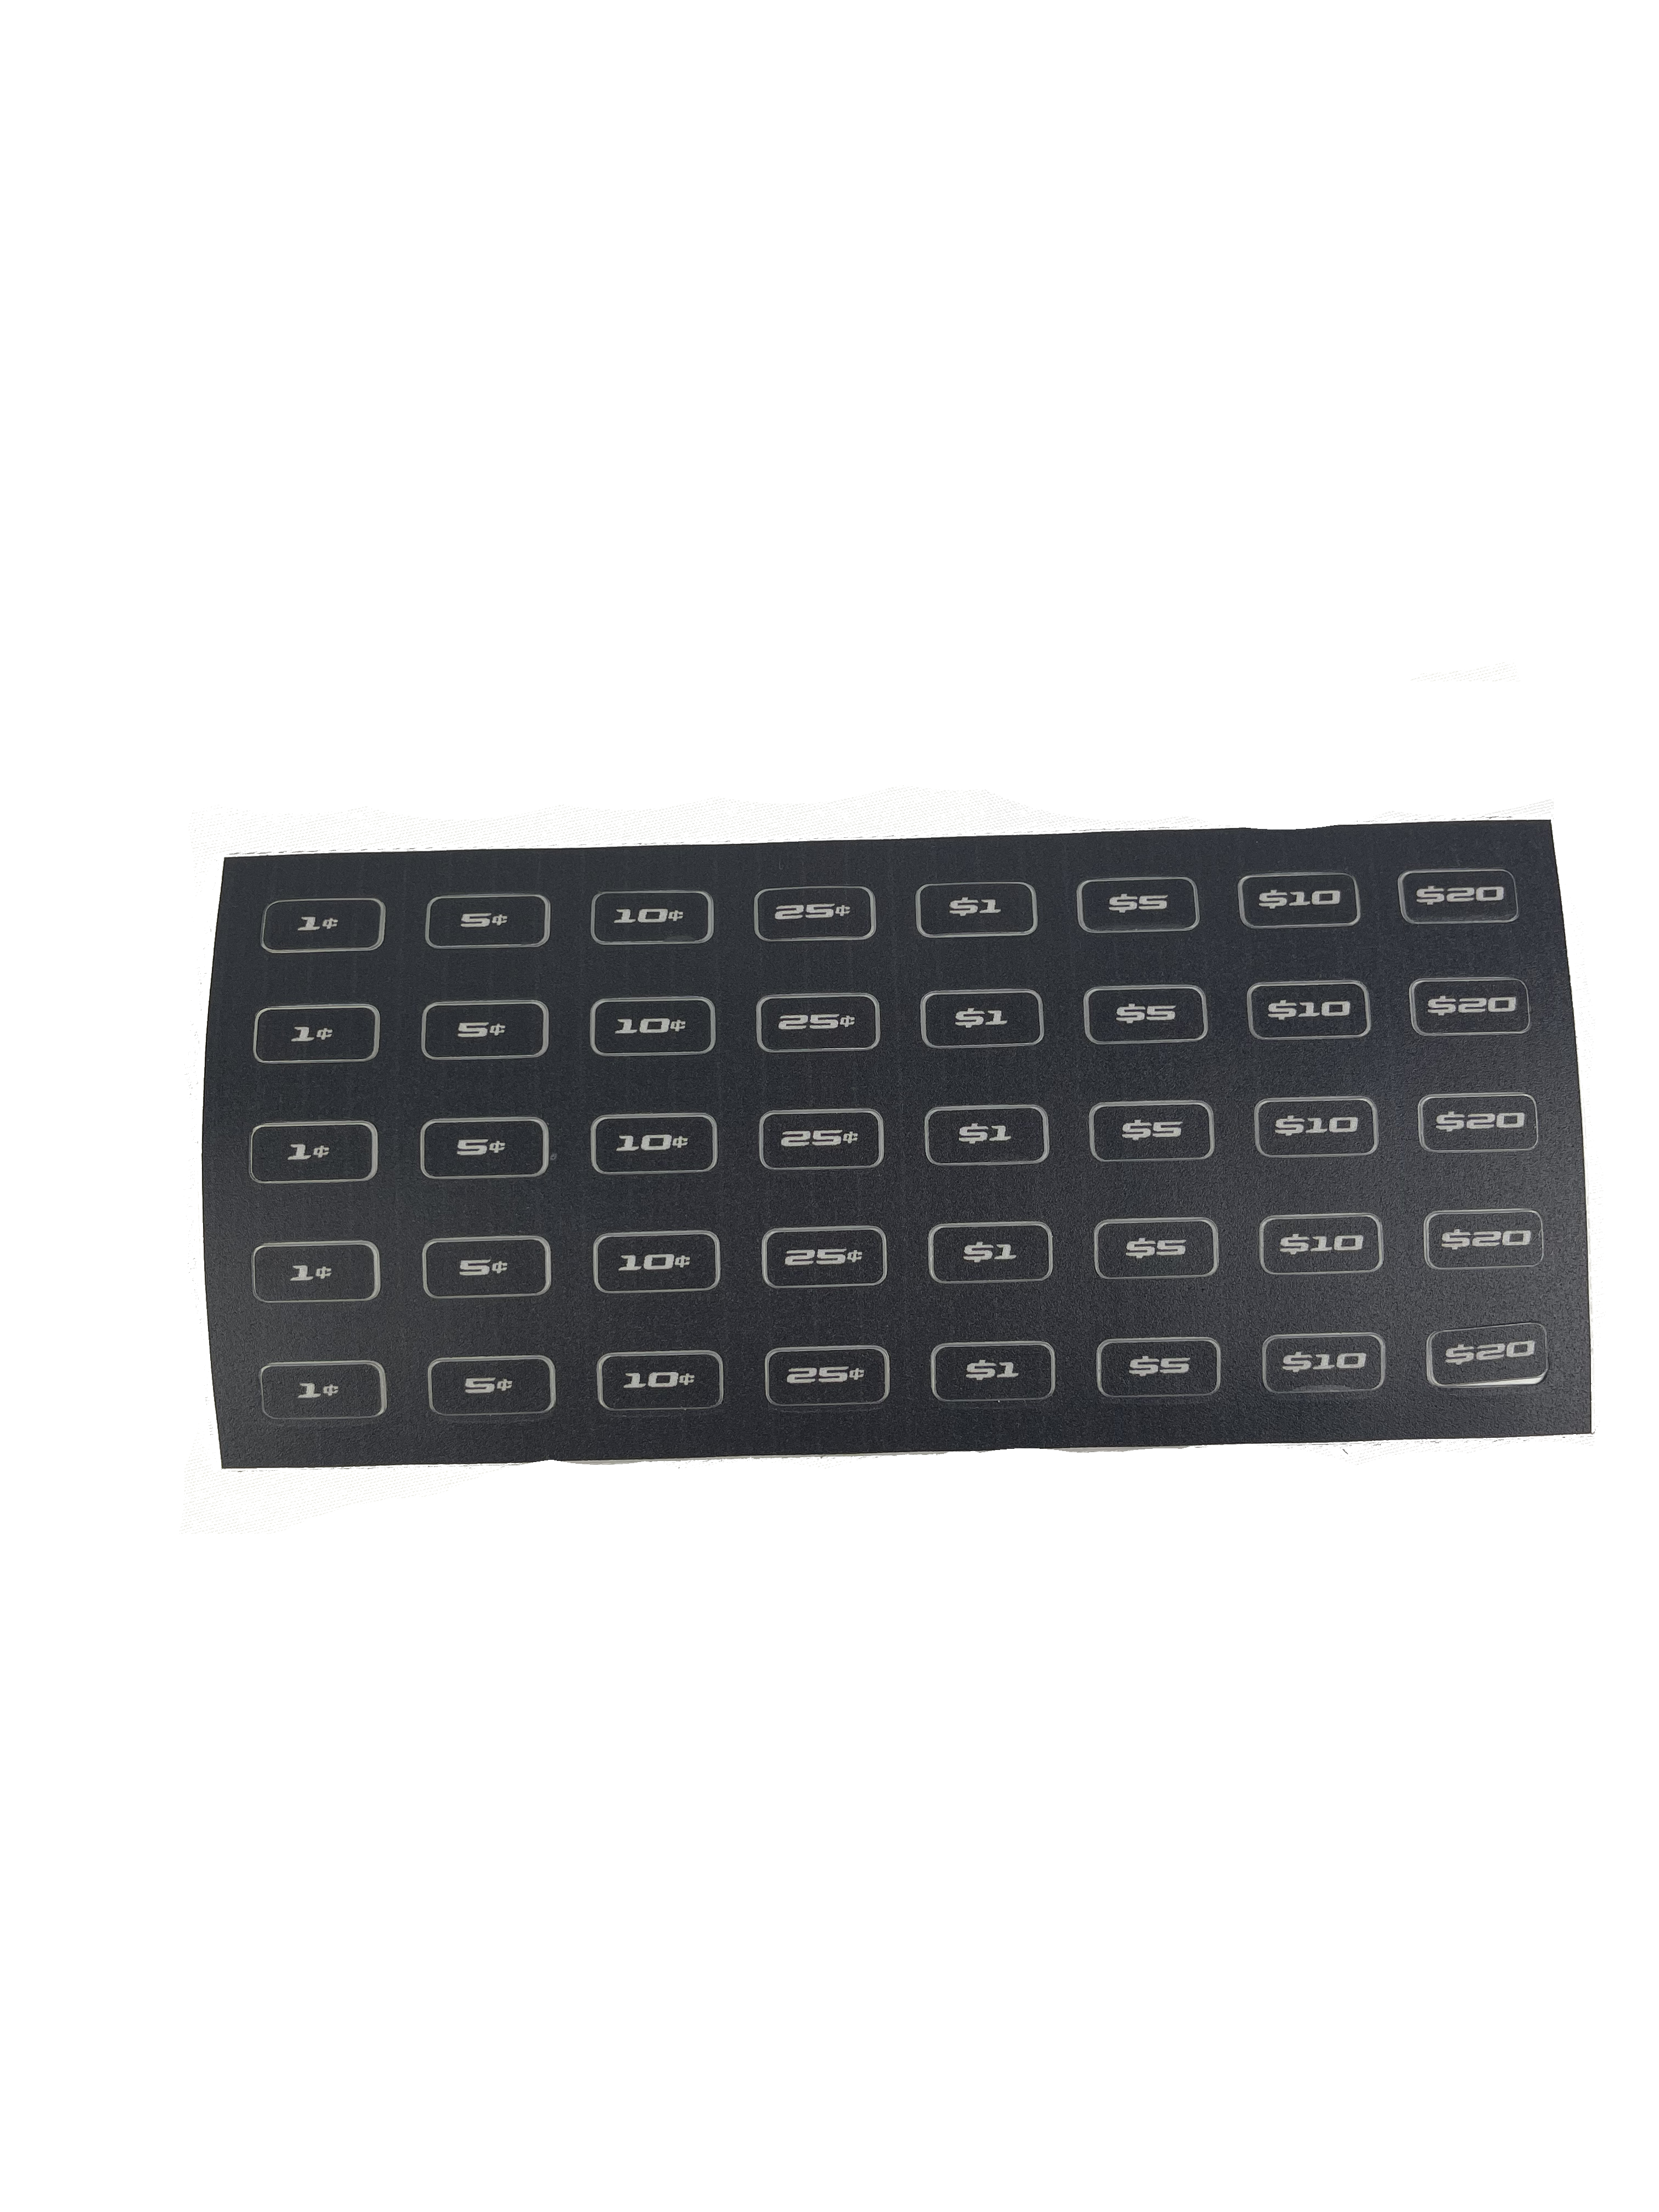 Decal Kit - Control Panel Denomination - Grey Numbers (Qty = 2).